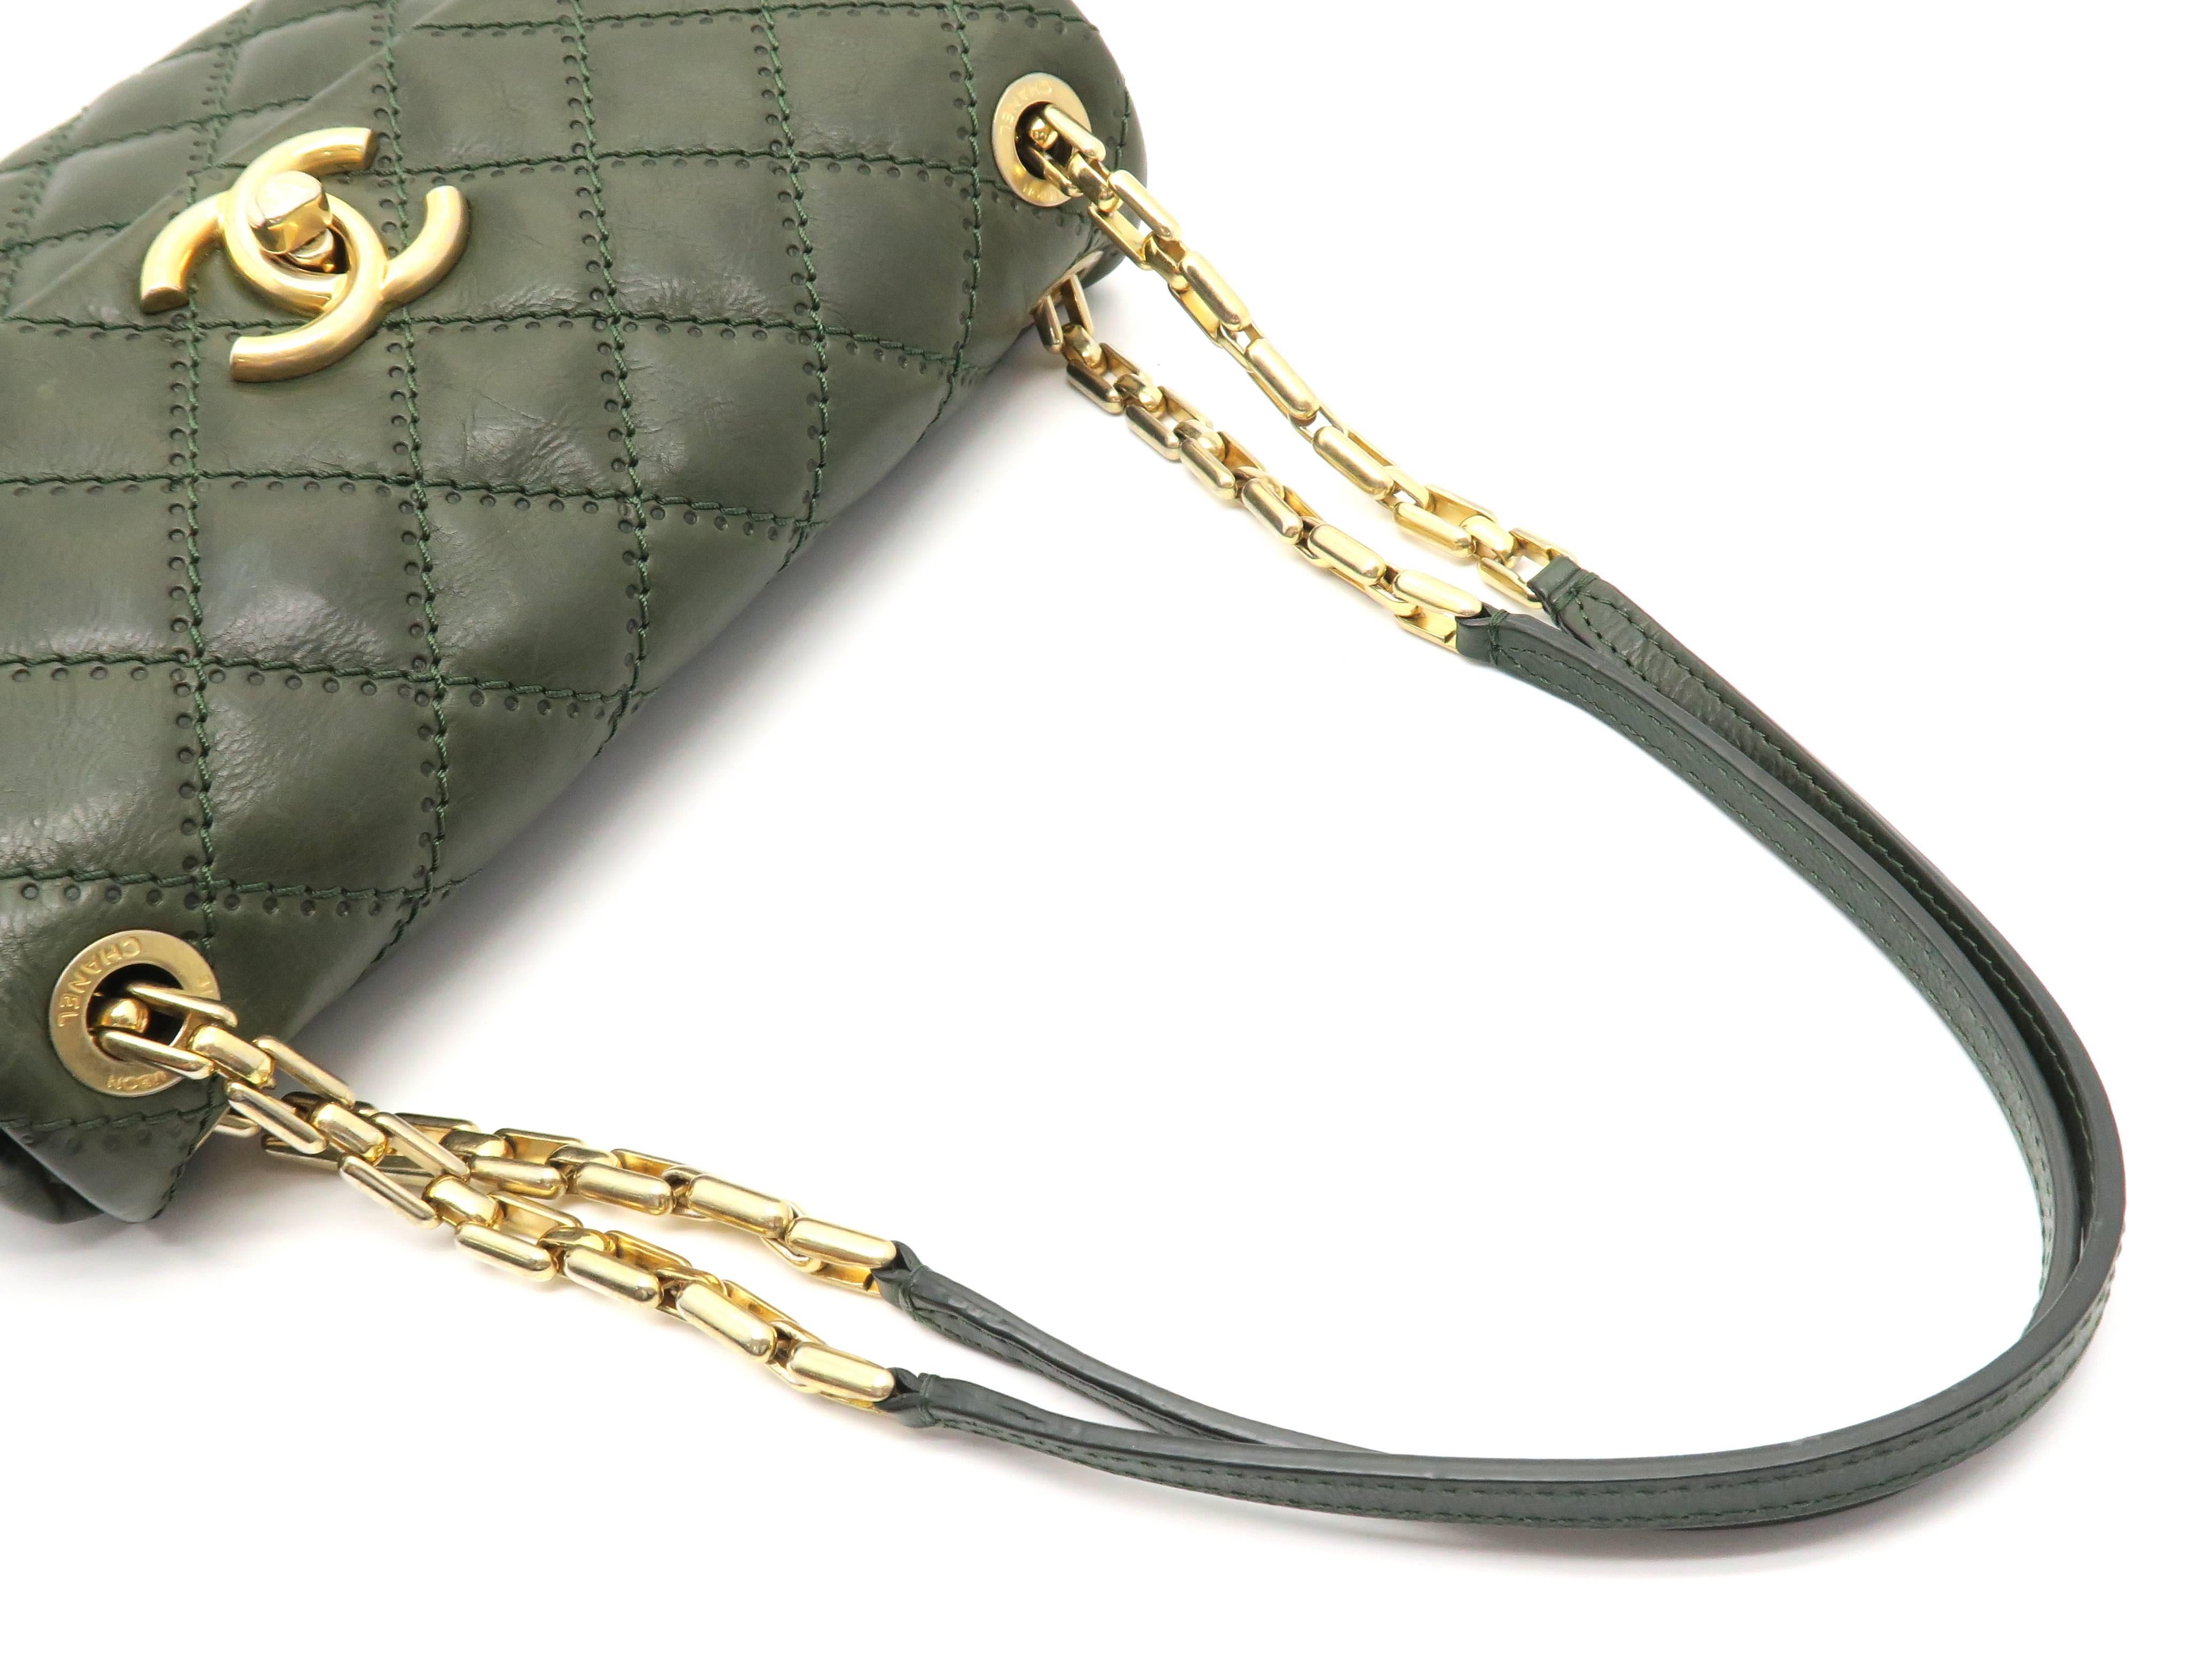 Black Chanel Green Quilting Calfskin Leather Gold Metal Chain Shoulder Bag For Sale